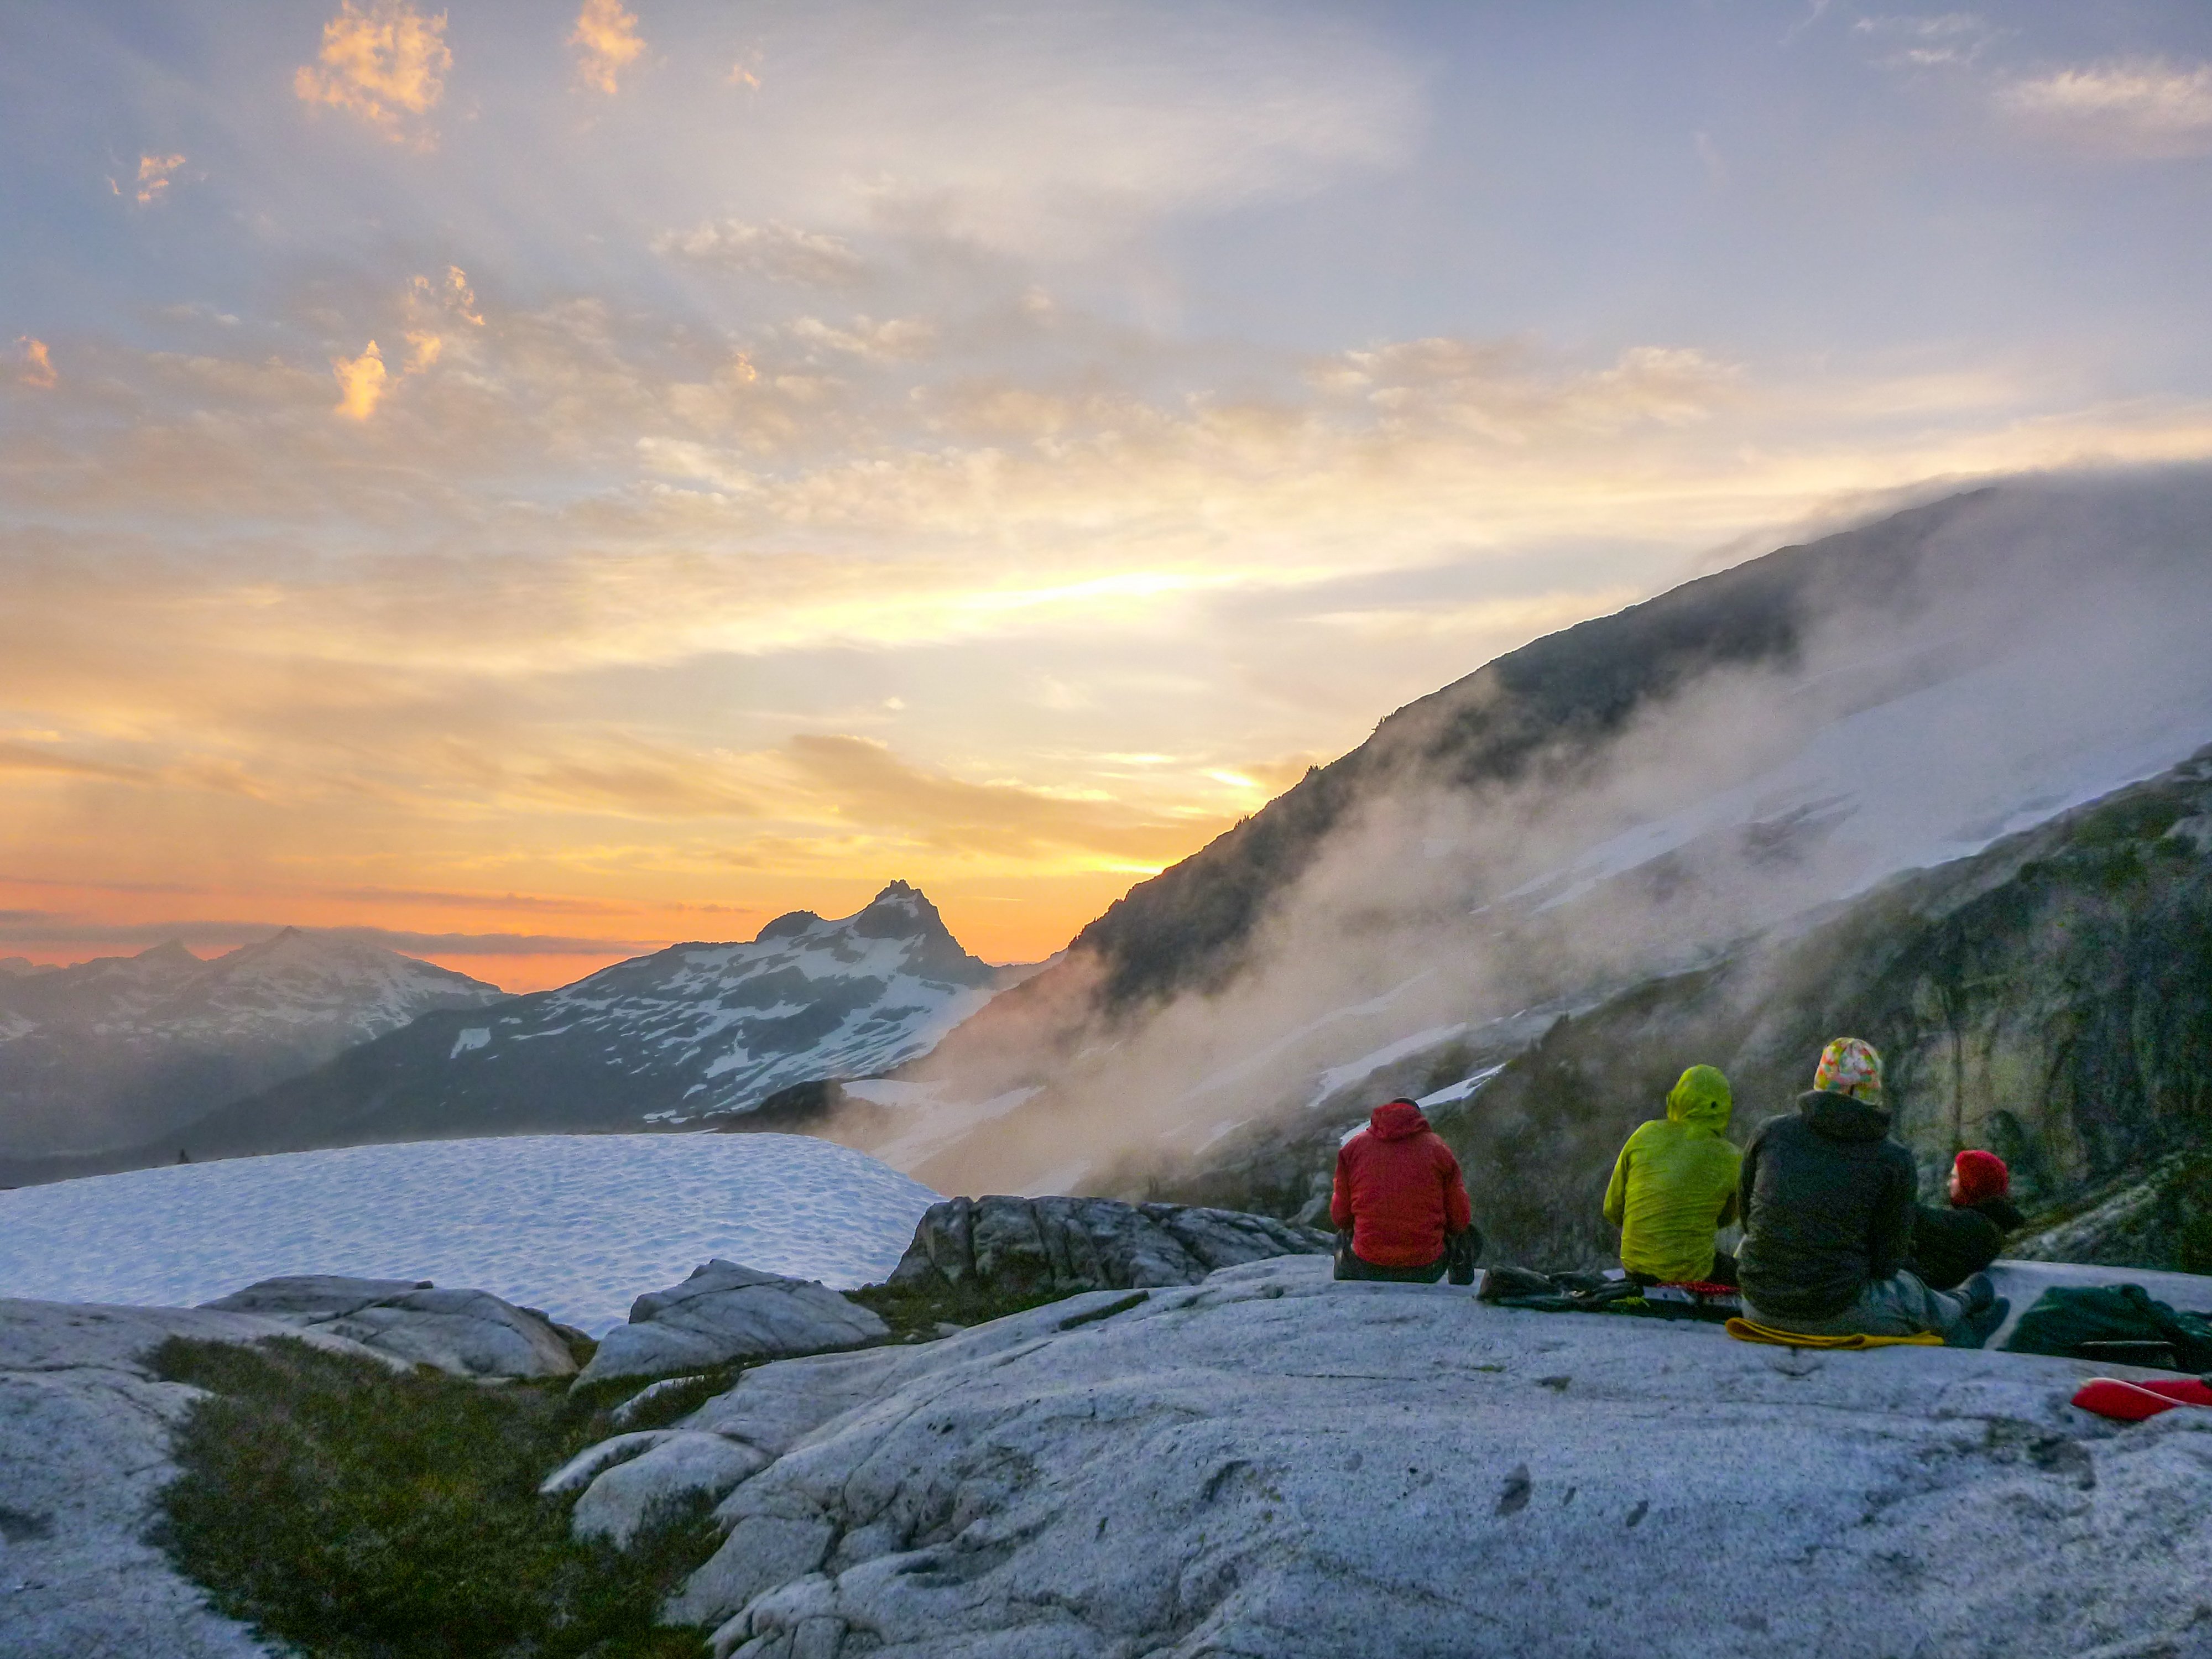 NOLS students sit on a rocky outcrop in the mountains of the Pacific Northwest at sunset with wisps of clouds